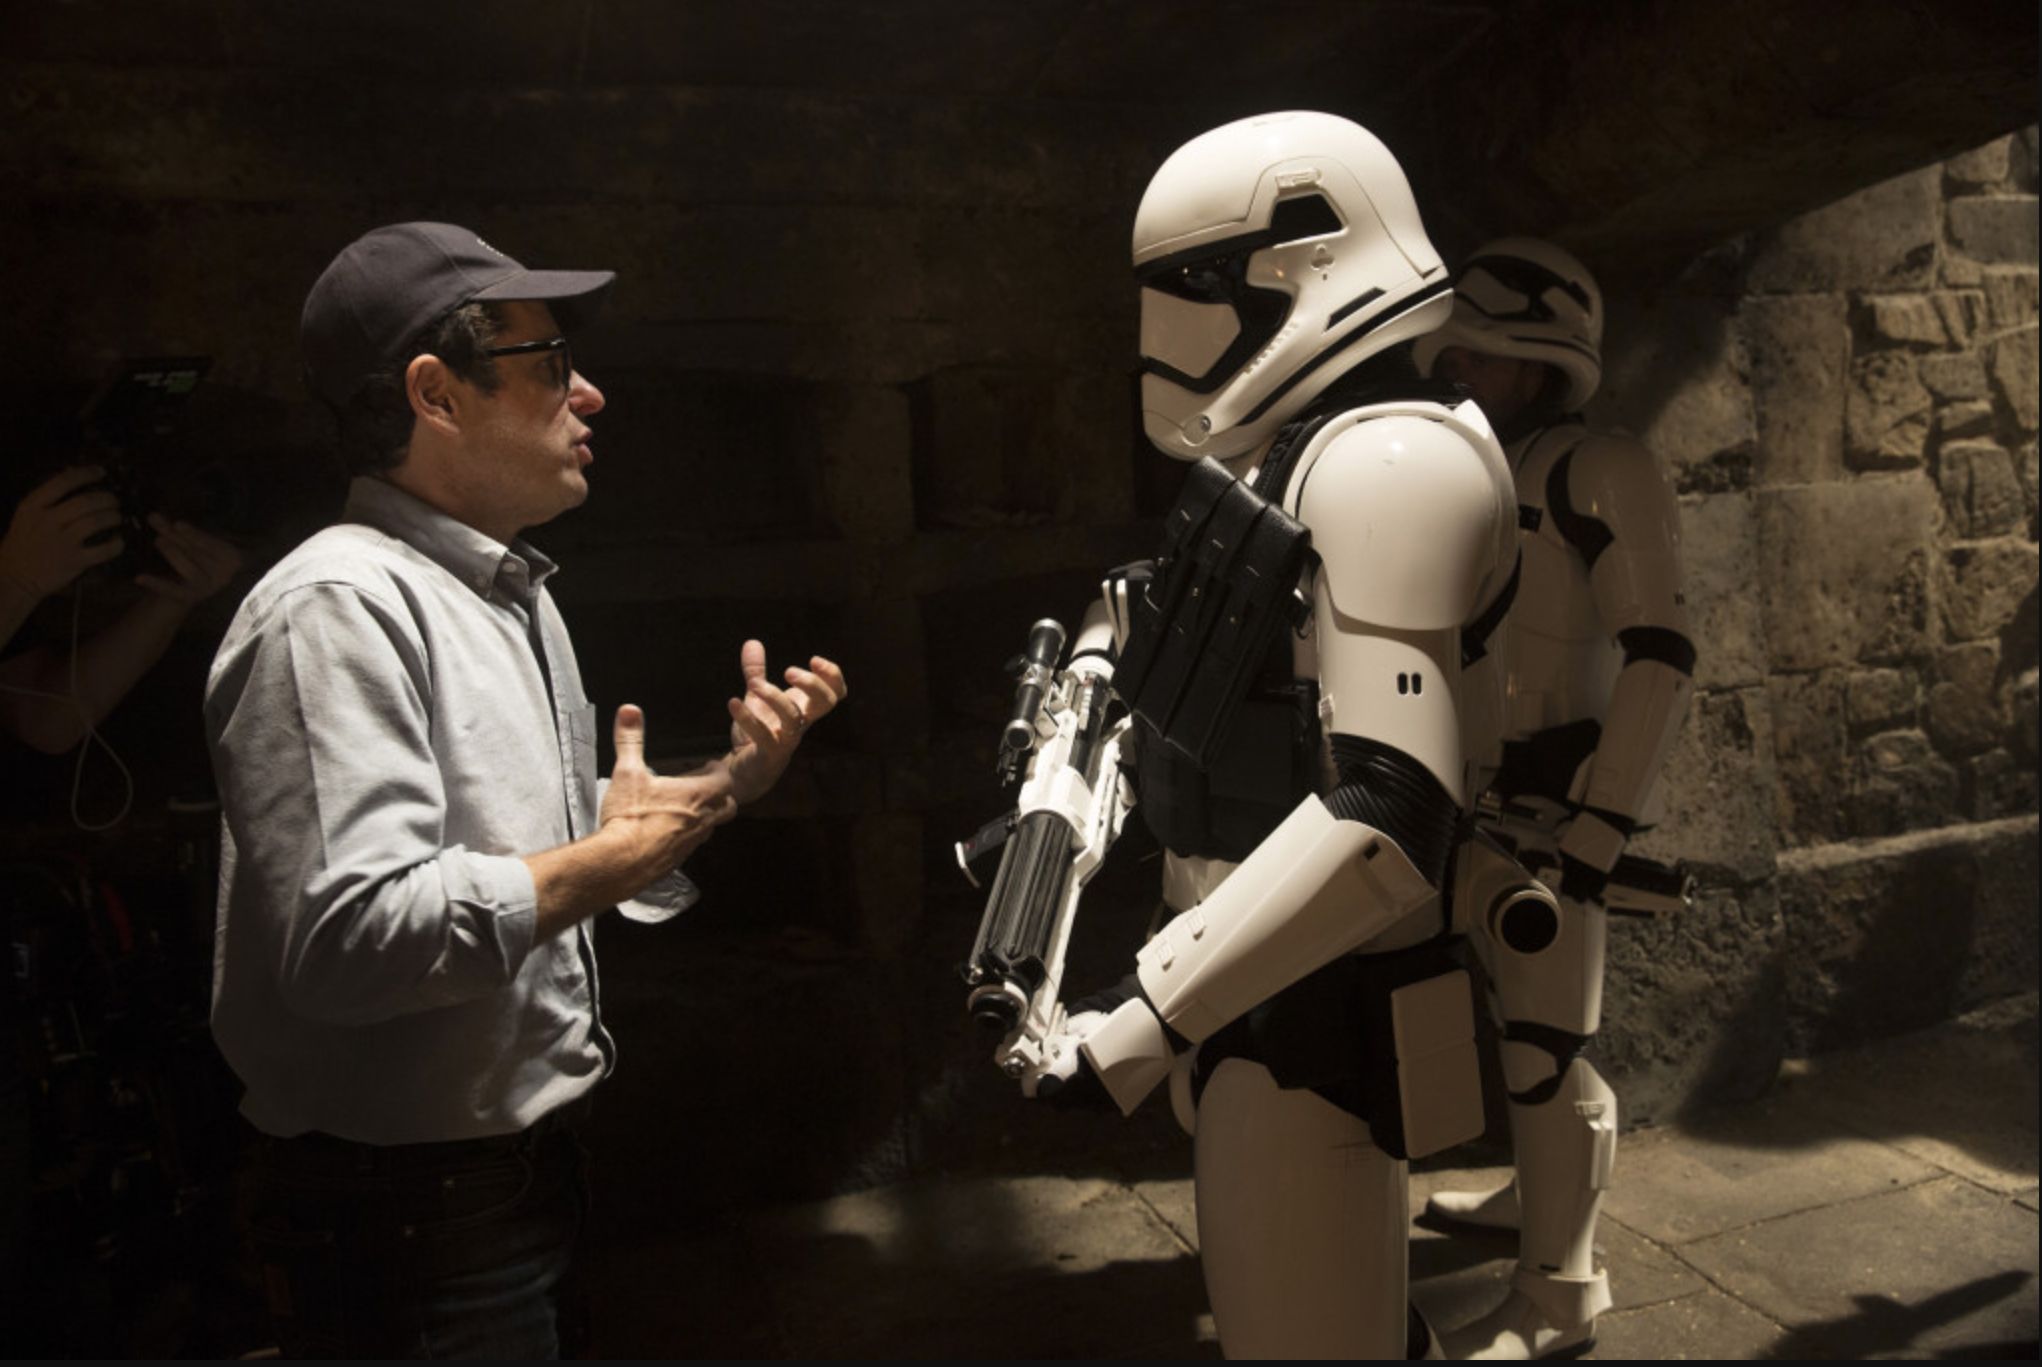 Star Wars - J.J. Abrams with a stormtrooper on The Force Awakens set